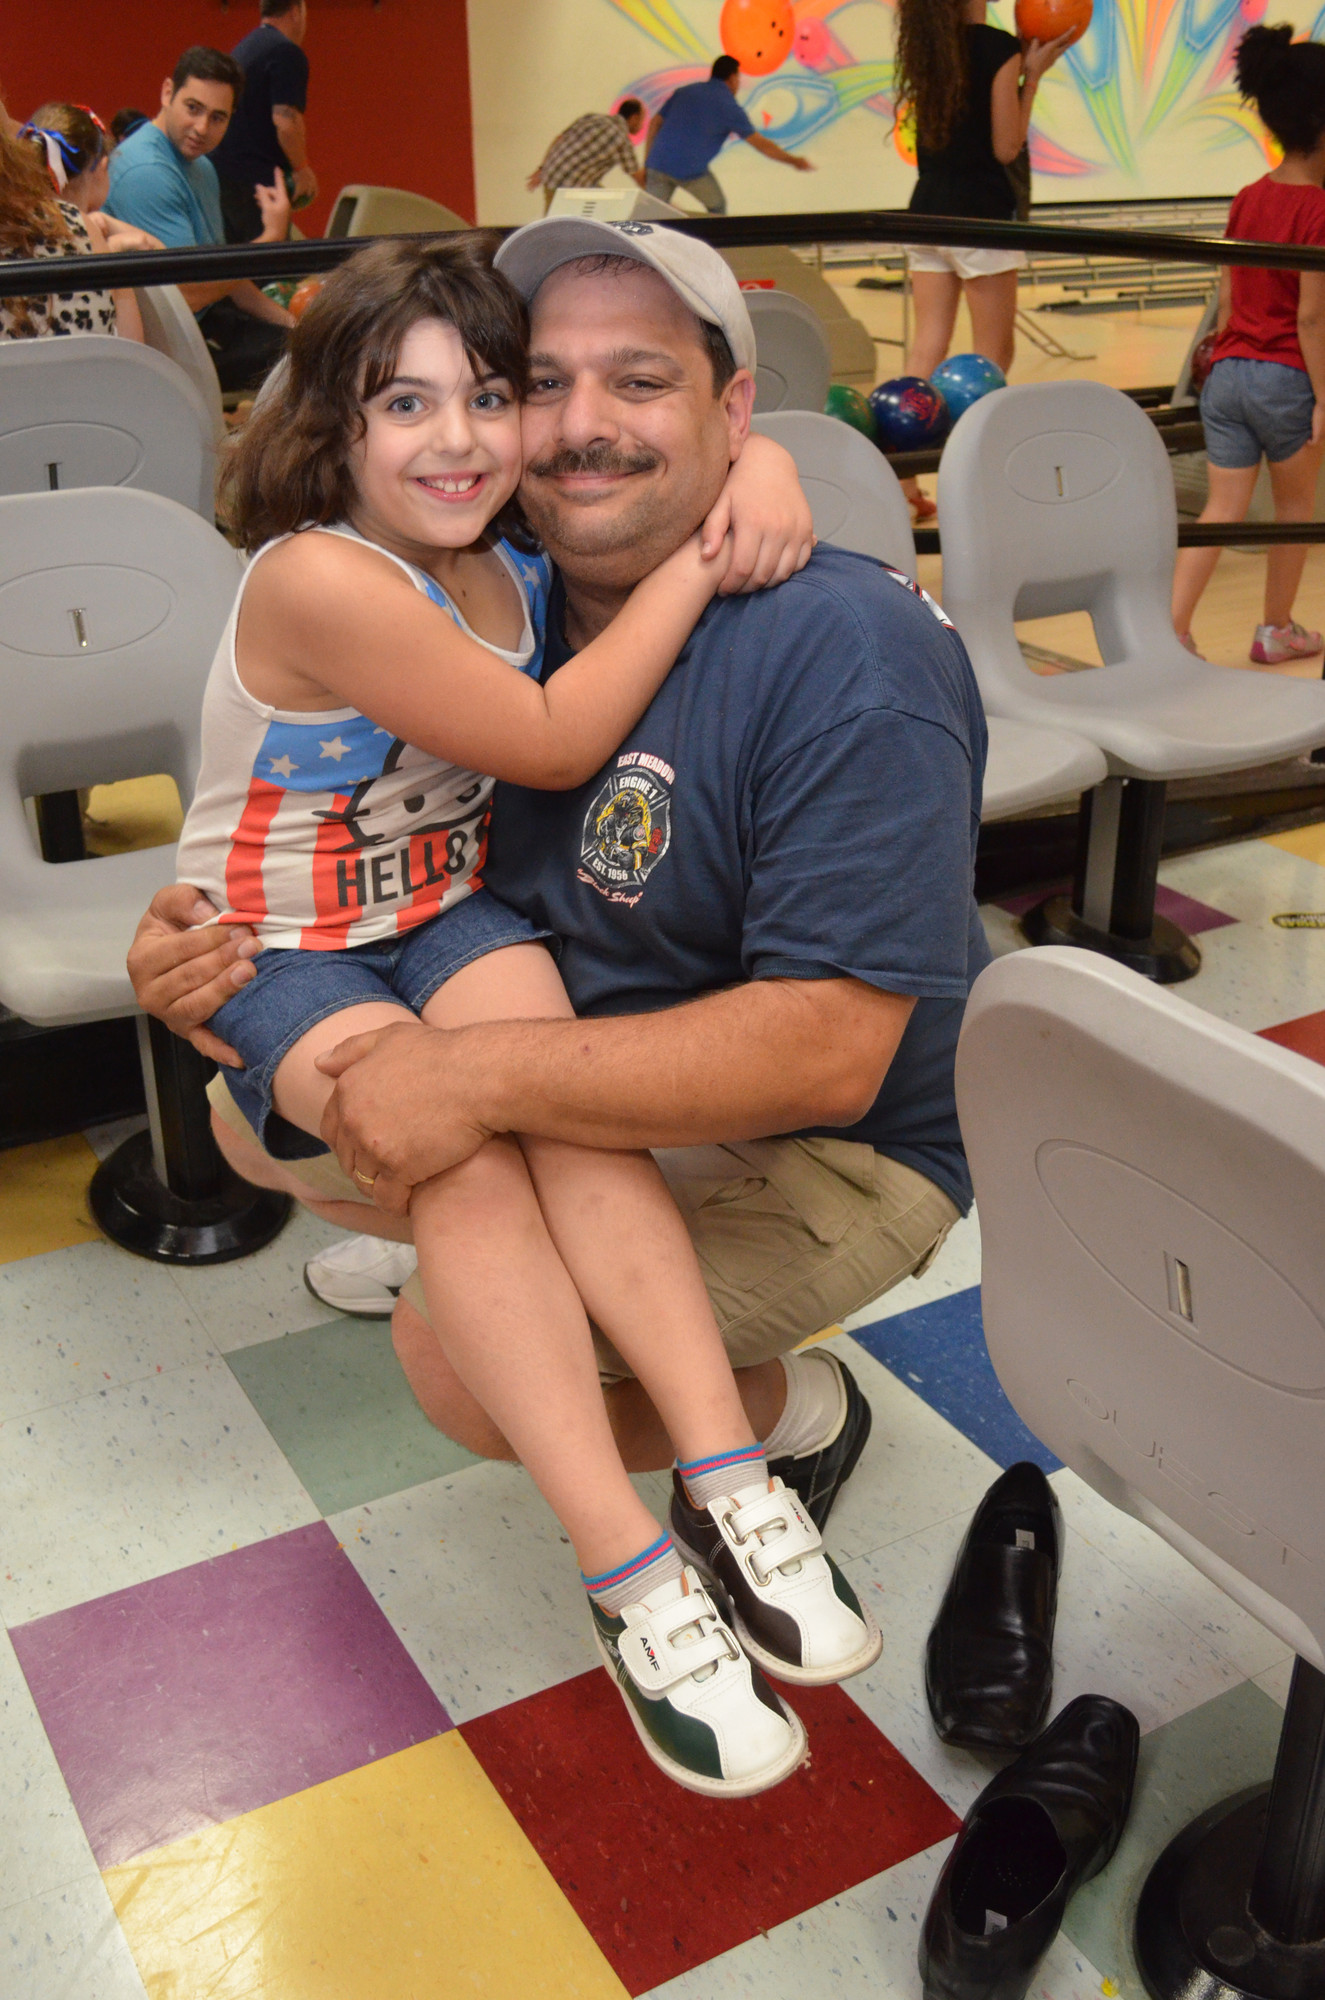 Jaclyn Sisca, 7, struck a pose with her dad, Marty.